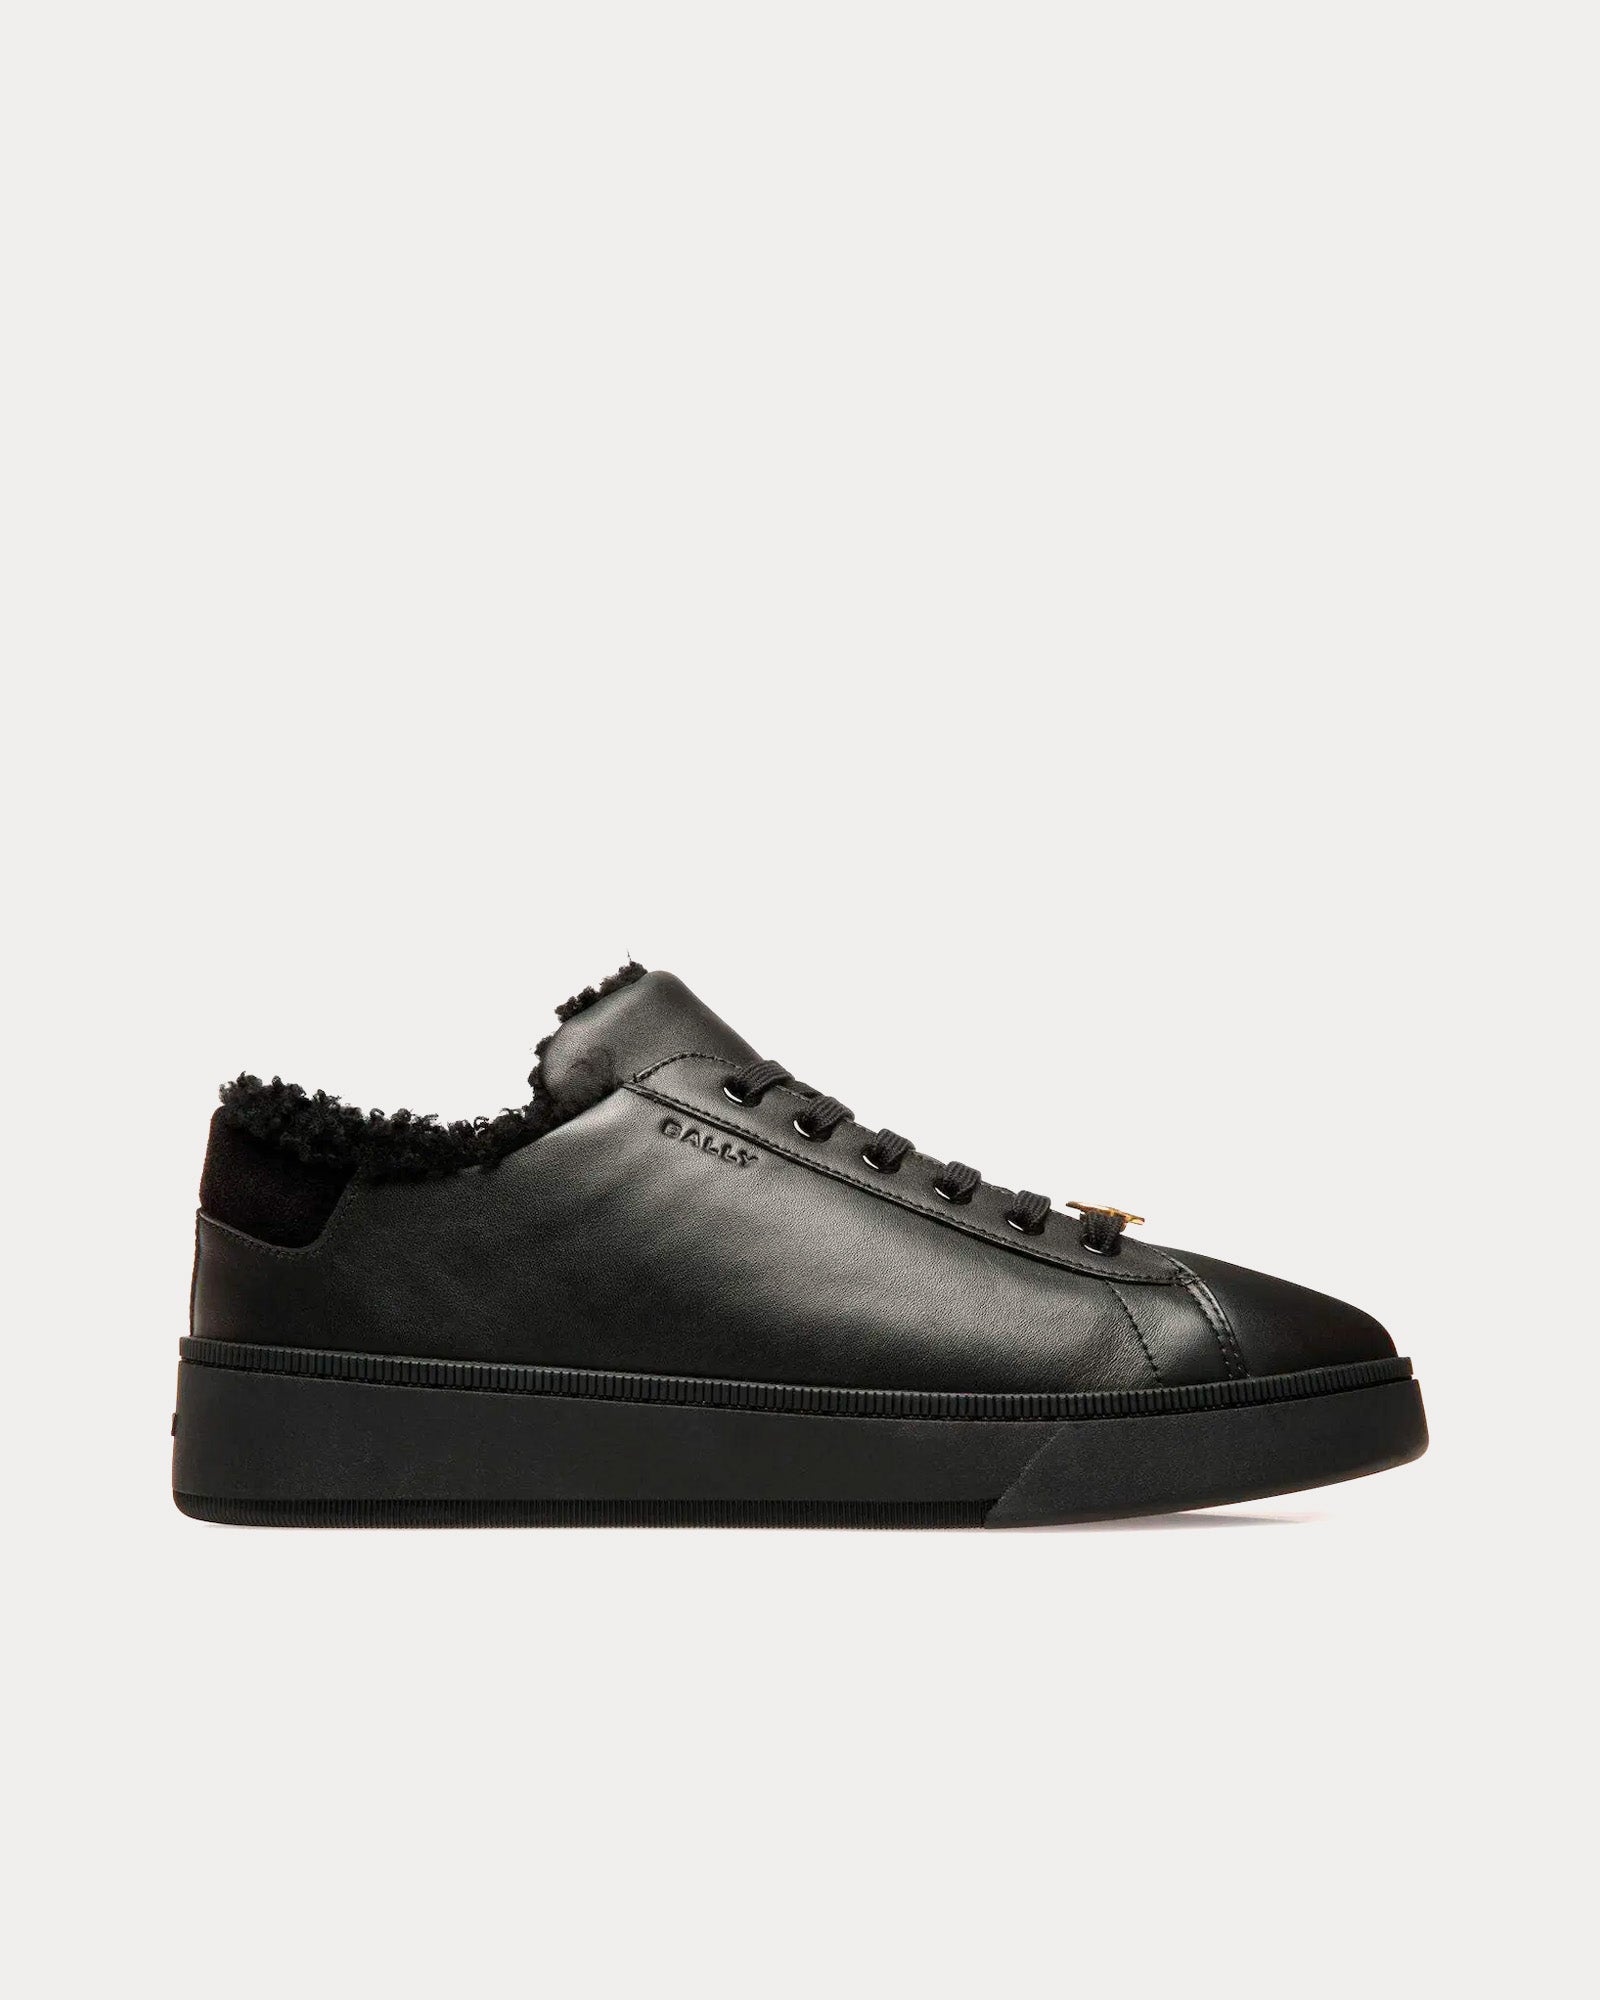 Bally - Raise Leather & Shearling Black Low Top Sneakers